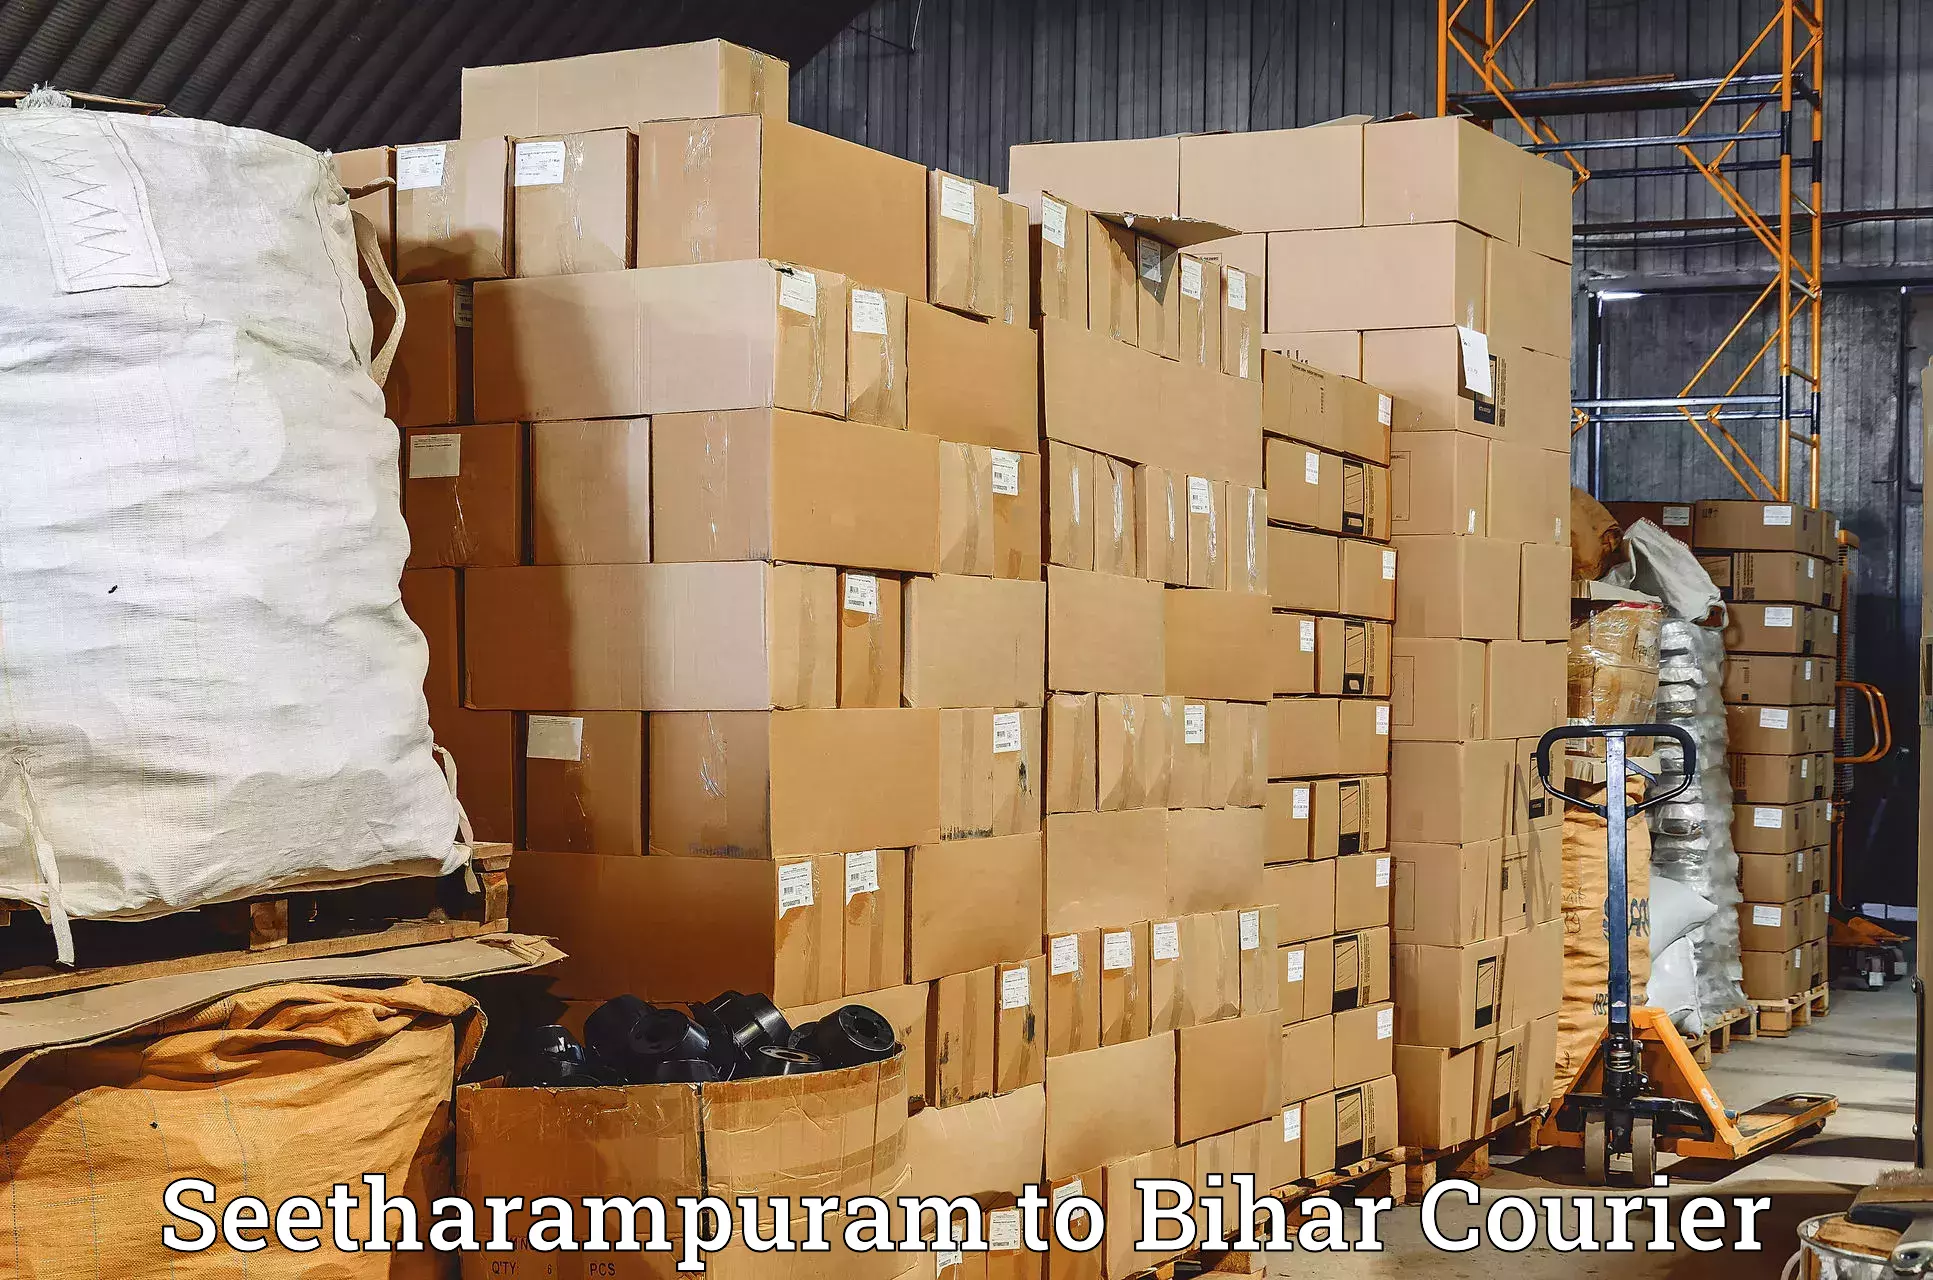 Express delivery capabilities Seetharampuram to Sultanganj